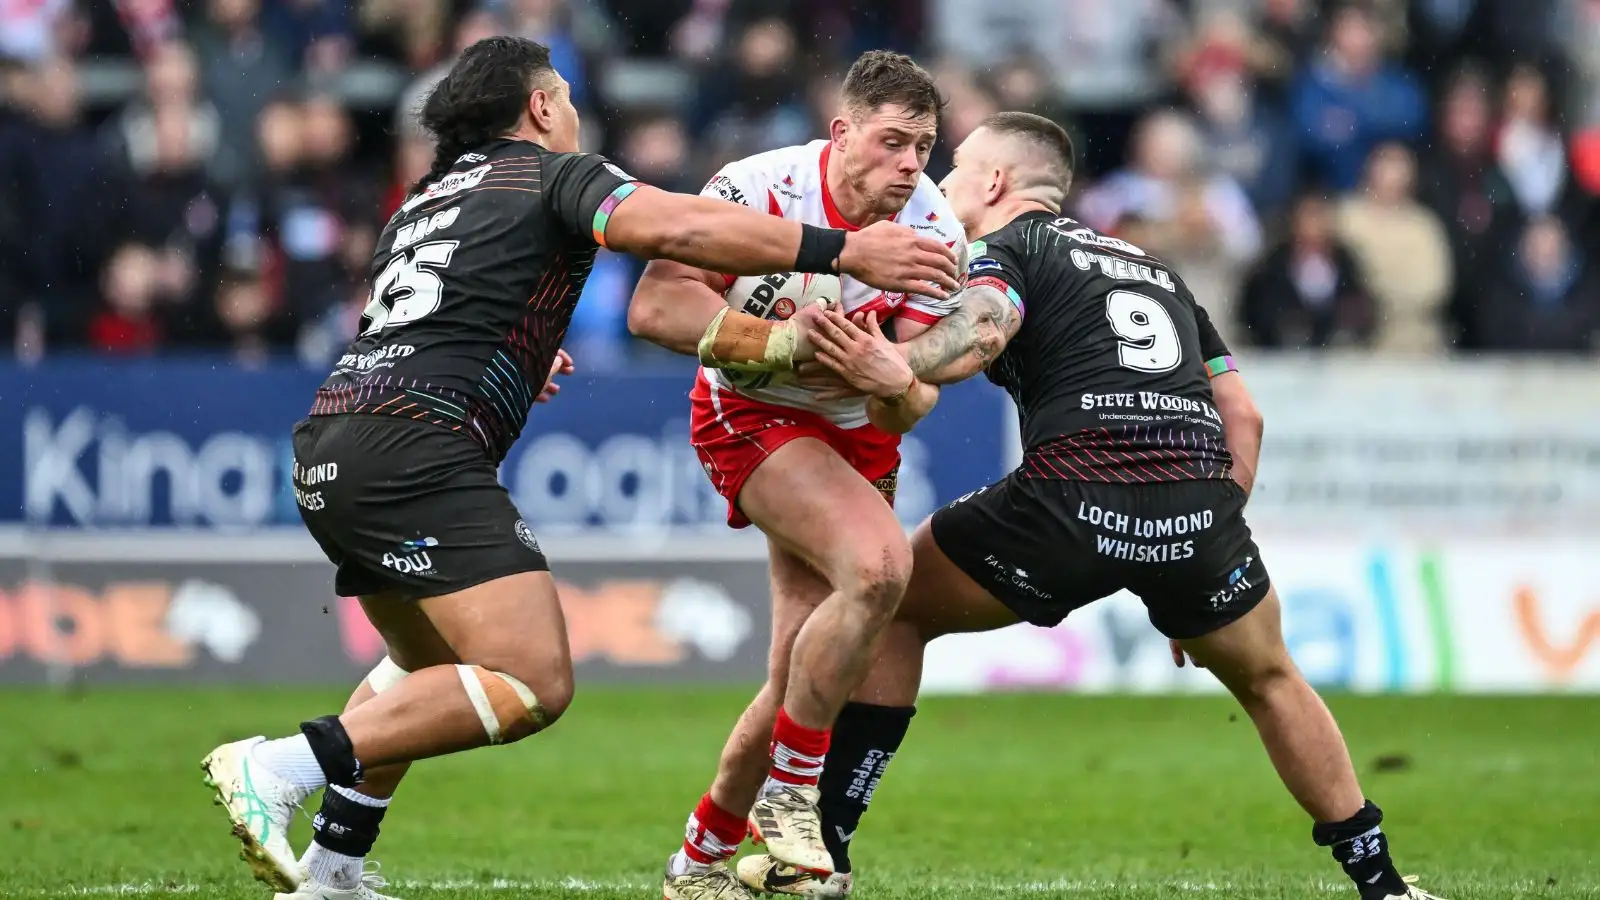 Charting the rise of Wigan Warriors hooker Brad O’Neill who is a tackling machine